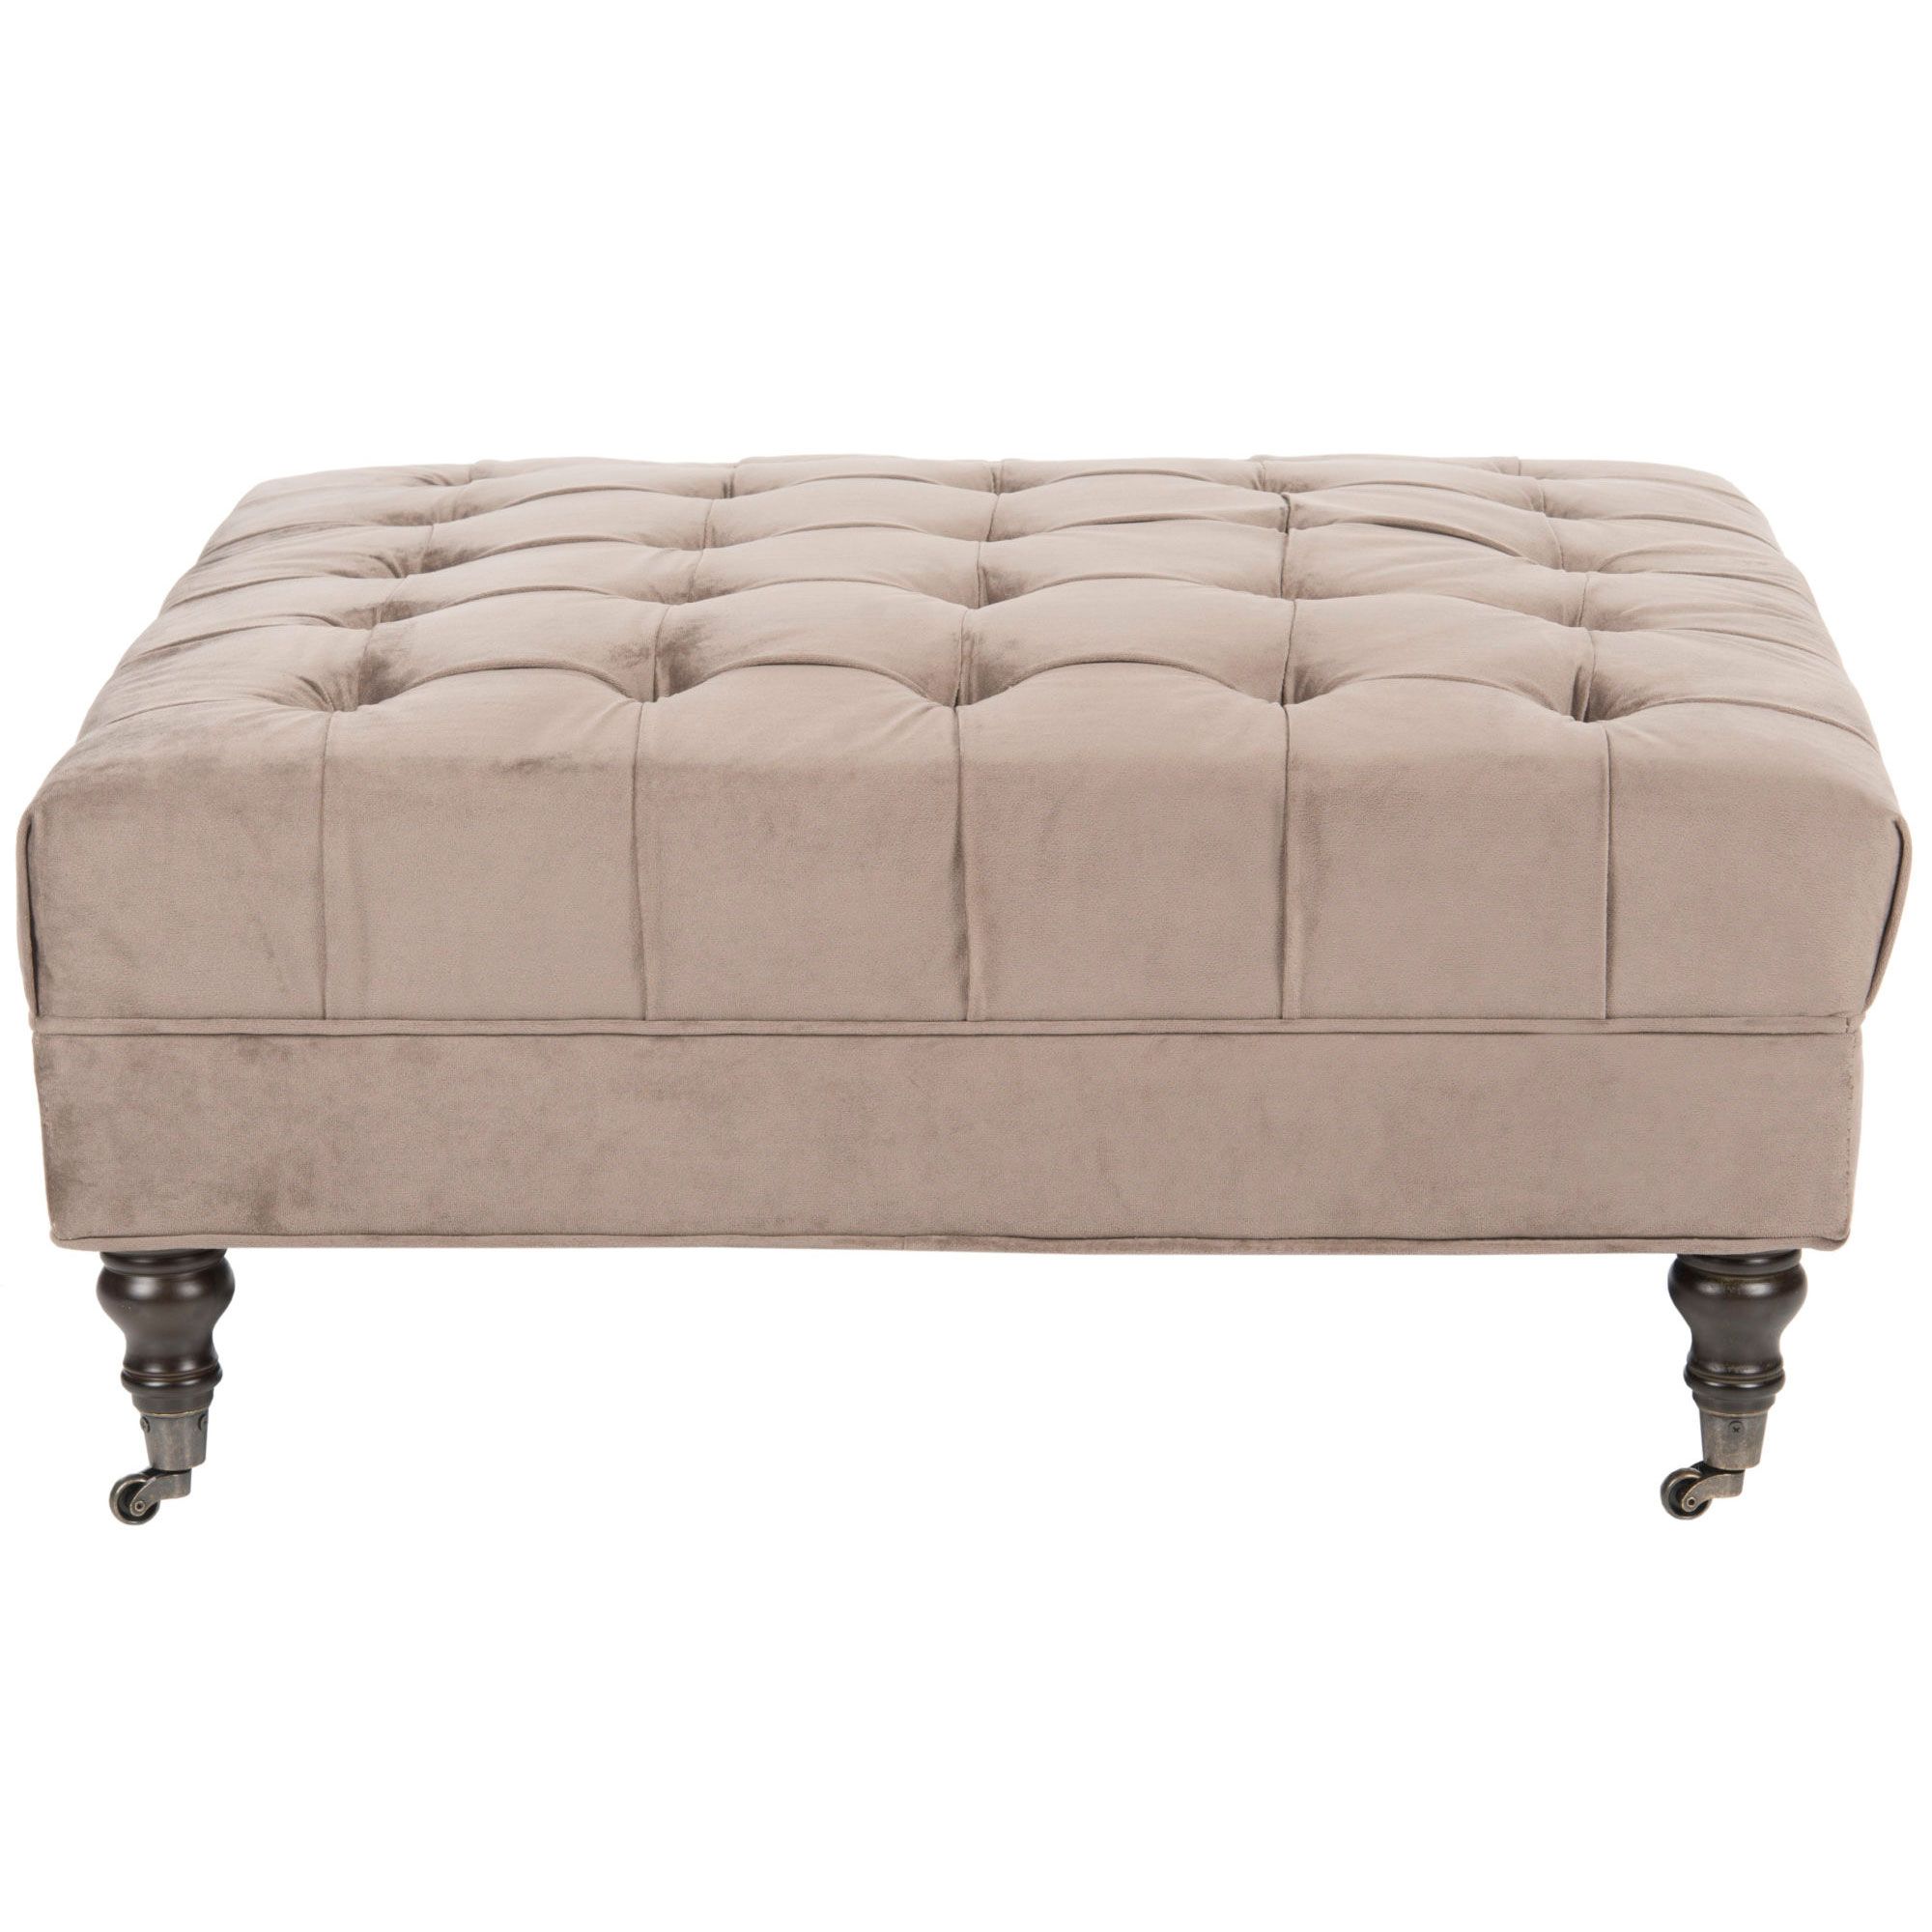 Clark Tufted Cocktail Ottoman For Most Popular Tufted Fabric Cocktail Ottomans (View 1 of 10)